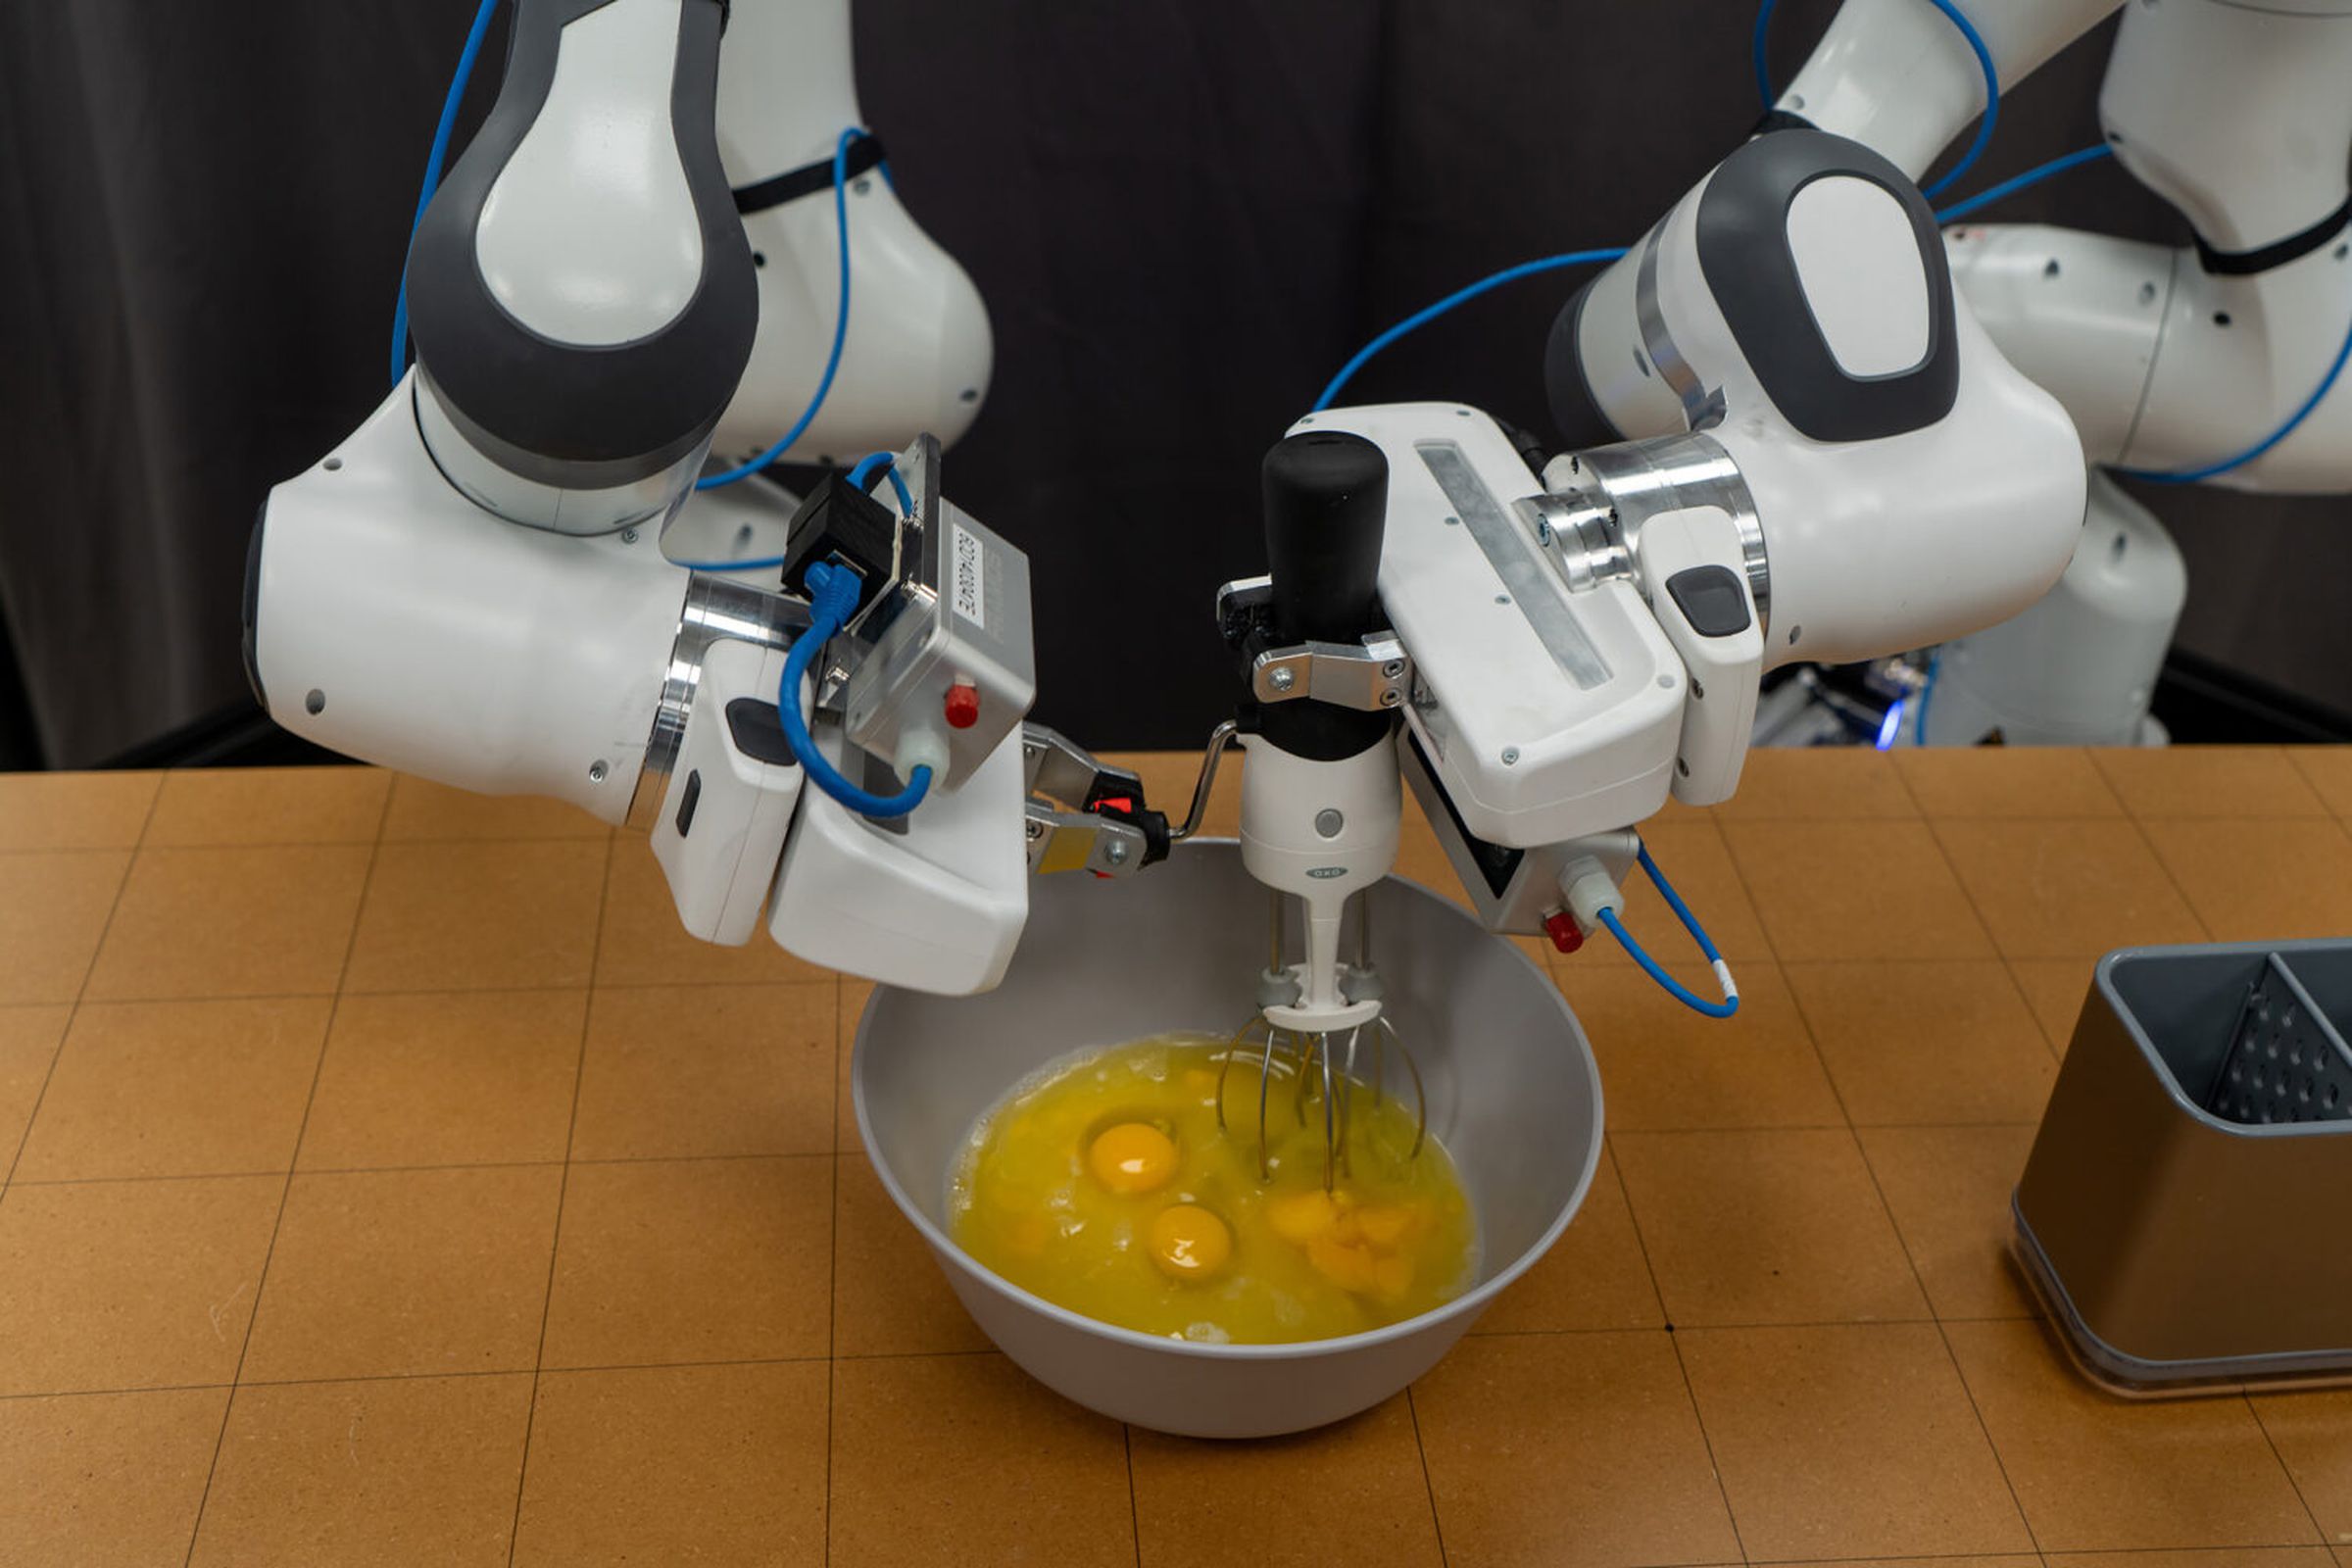 A picture of robotic arms whisking eggs in a metal bowl.